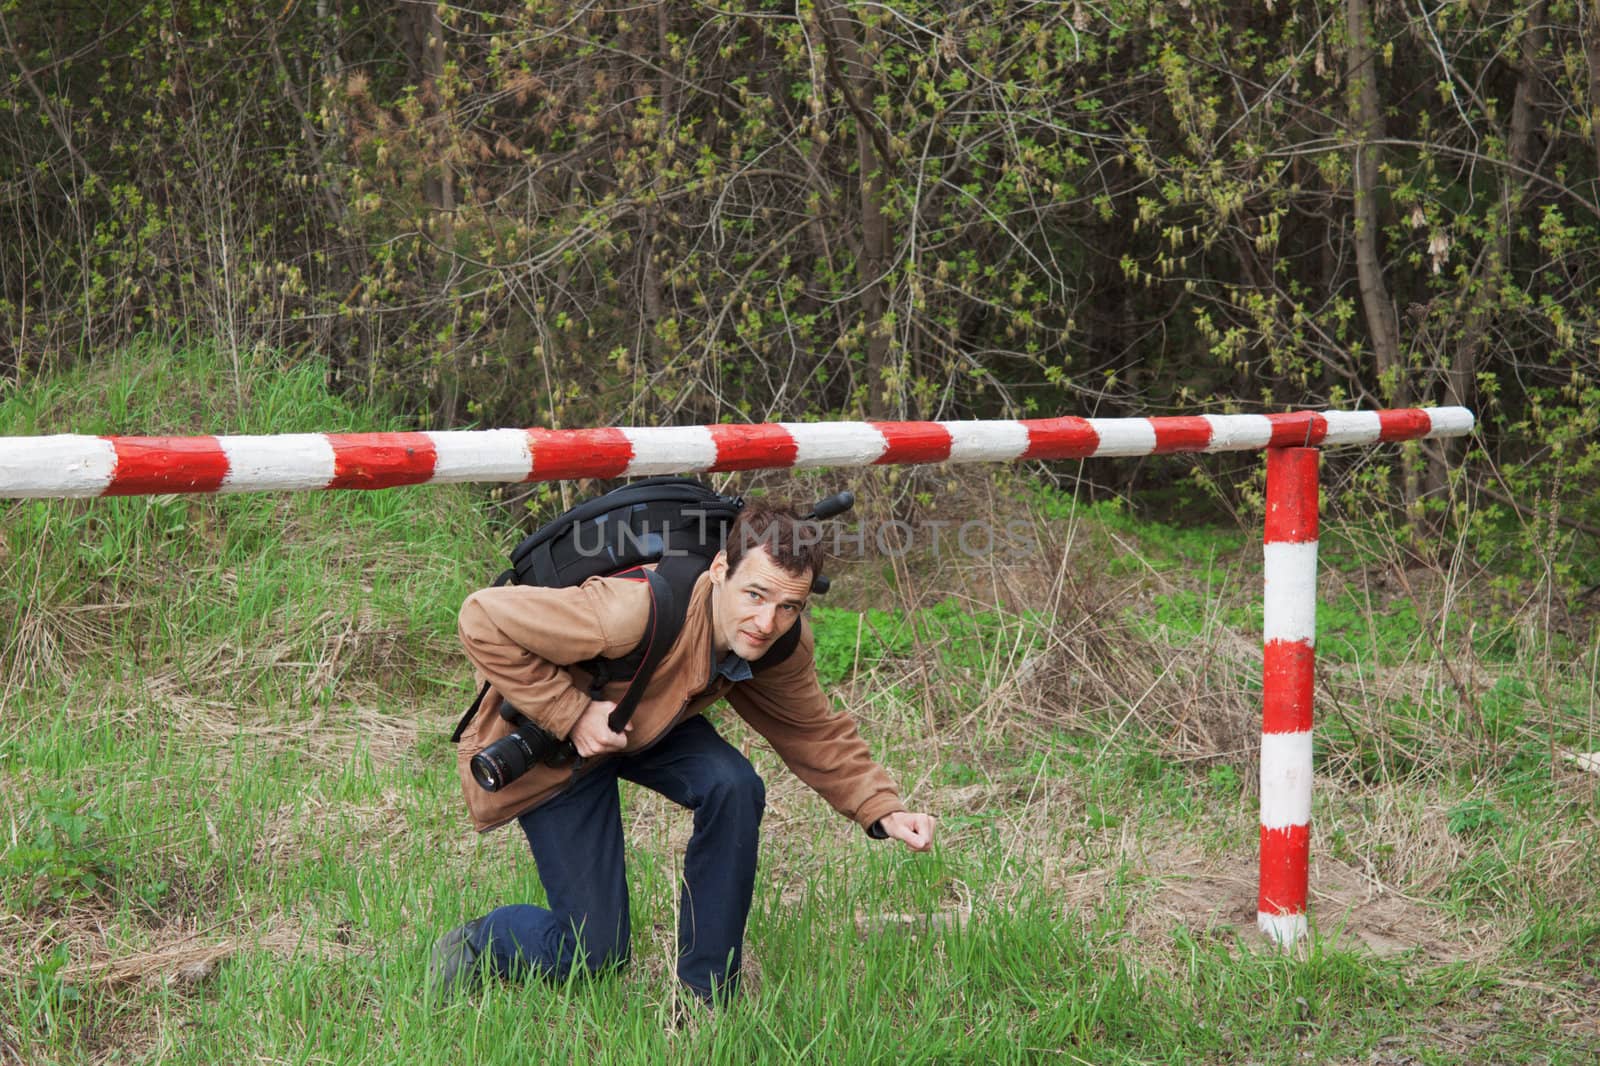 A young man with a backpack passes under the barrier